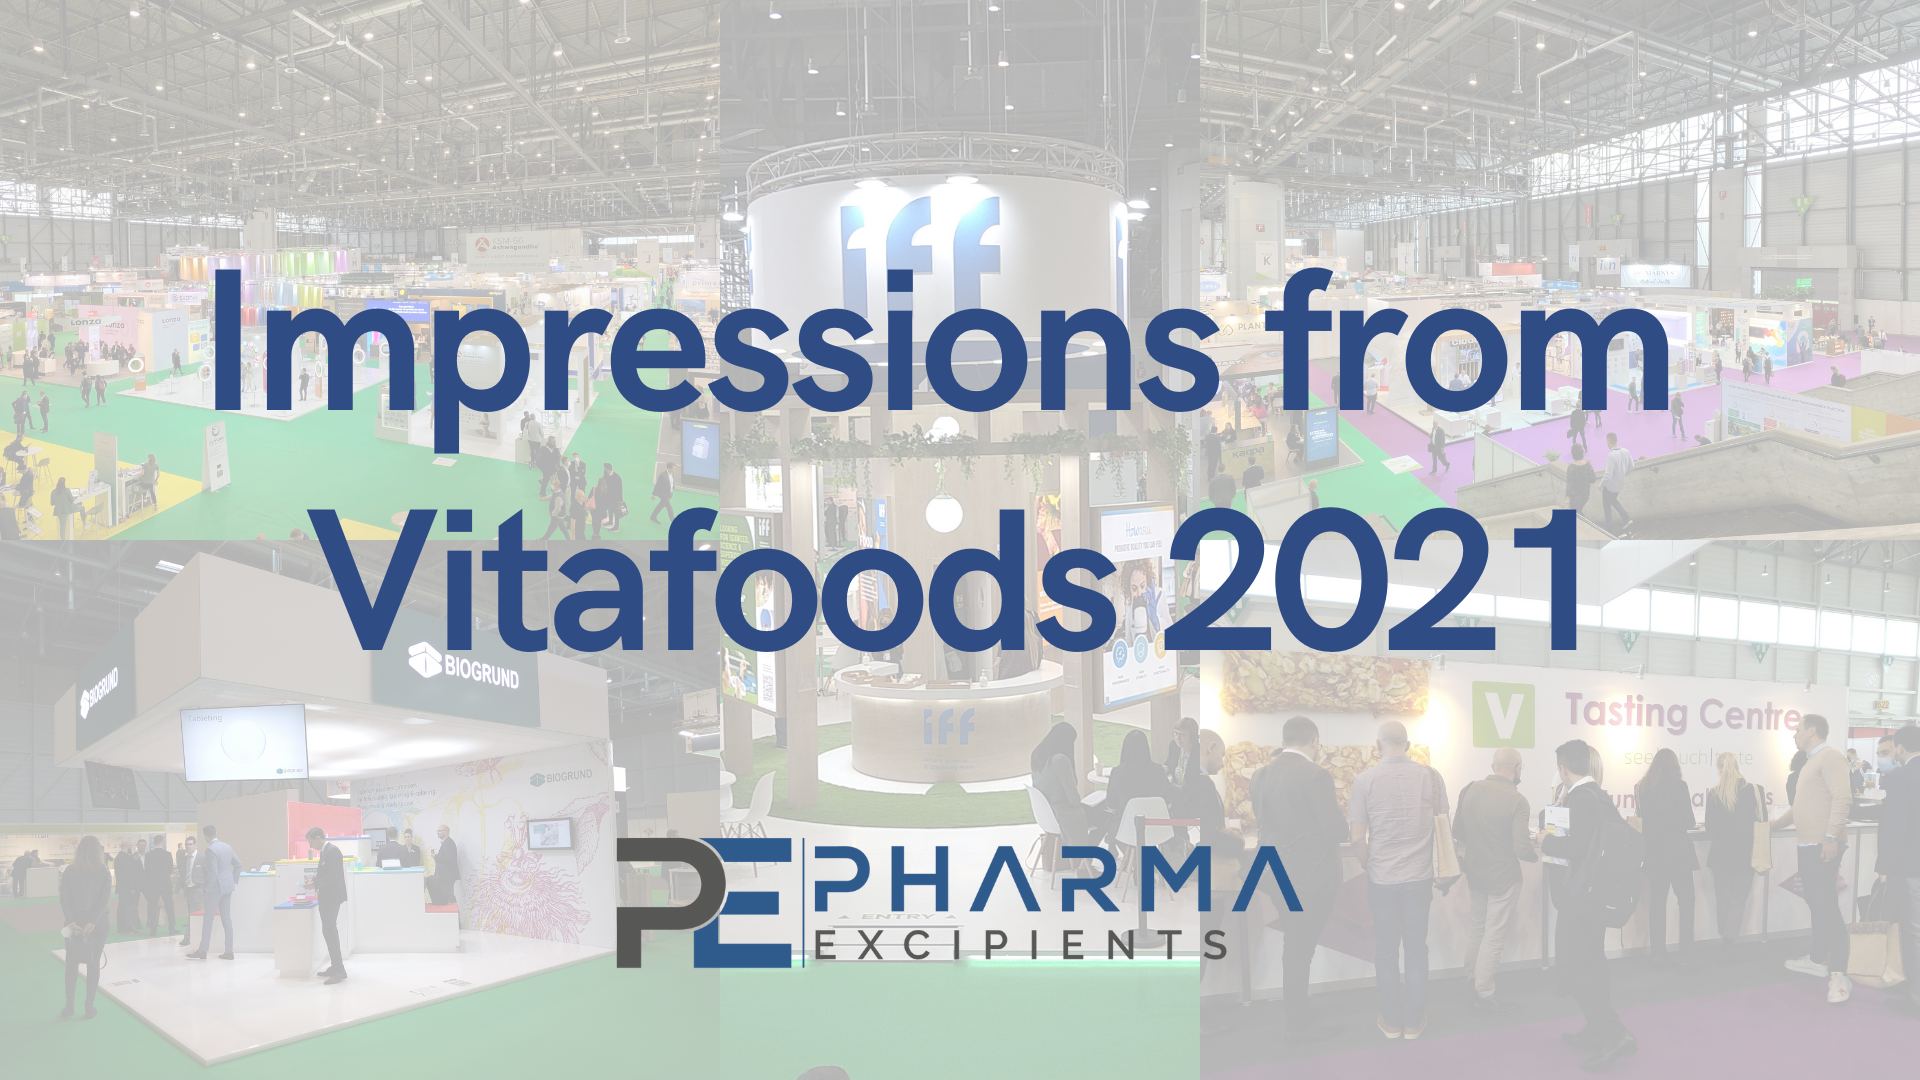 Impressions from Vitafoods 2021